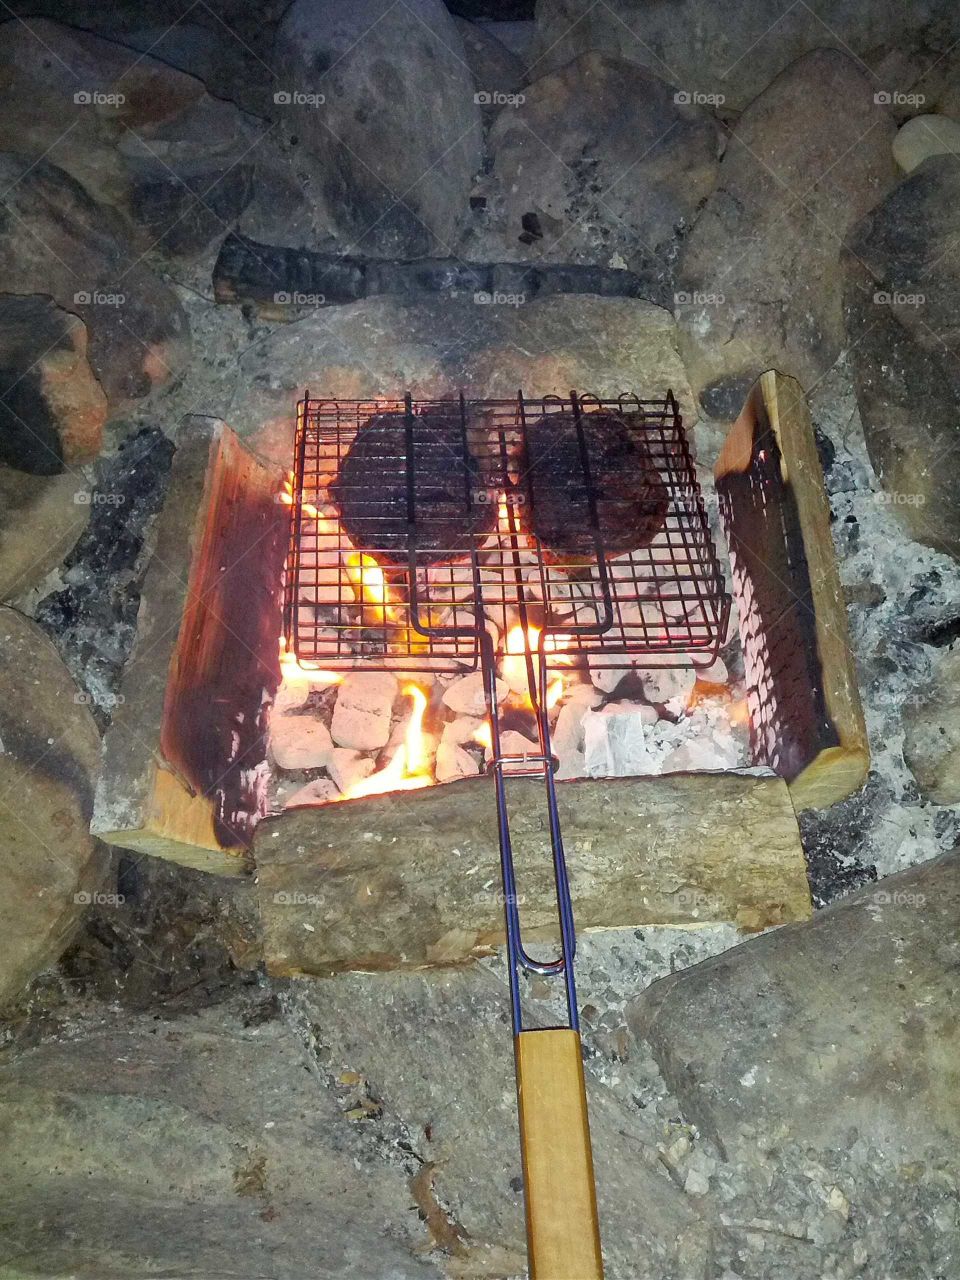 Steaks over the fire pit